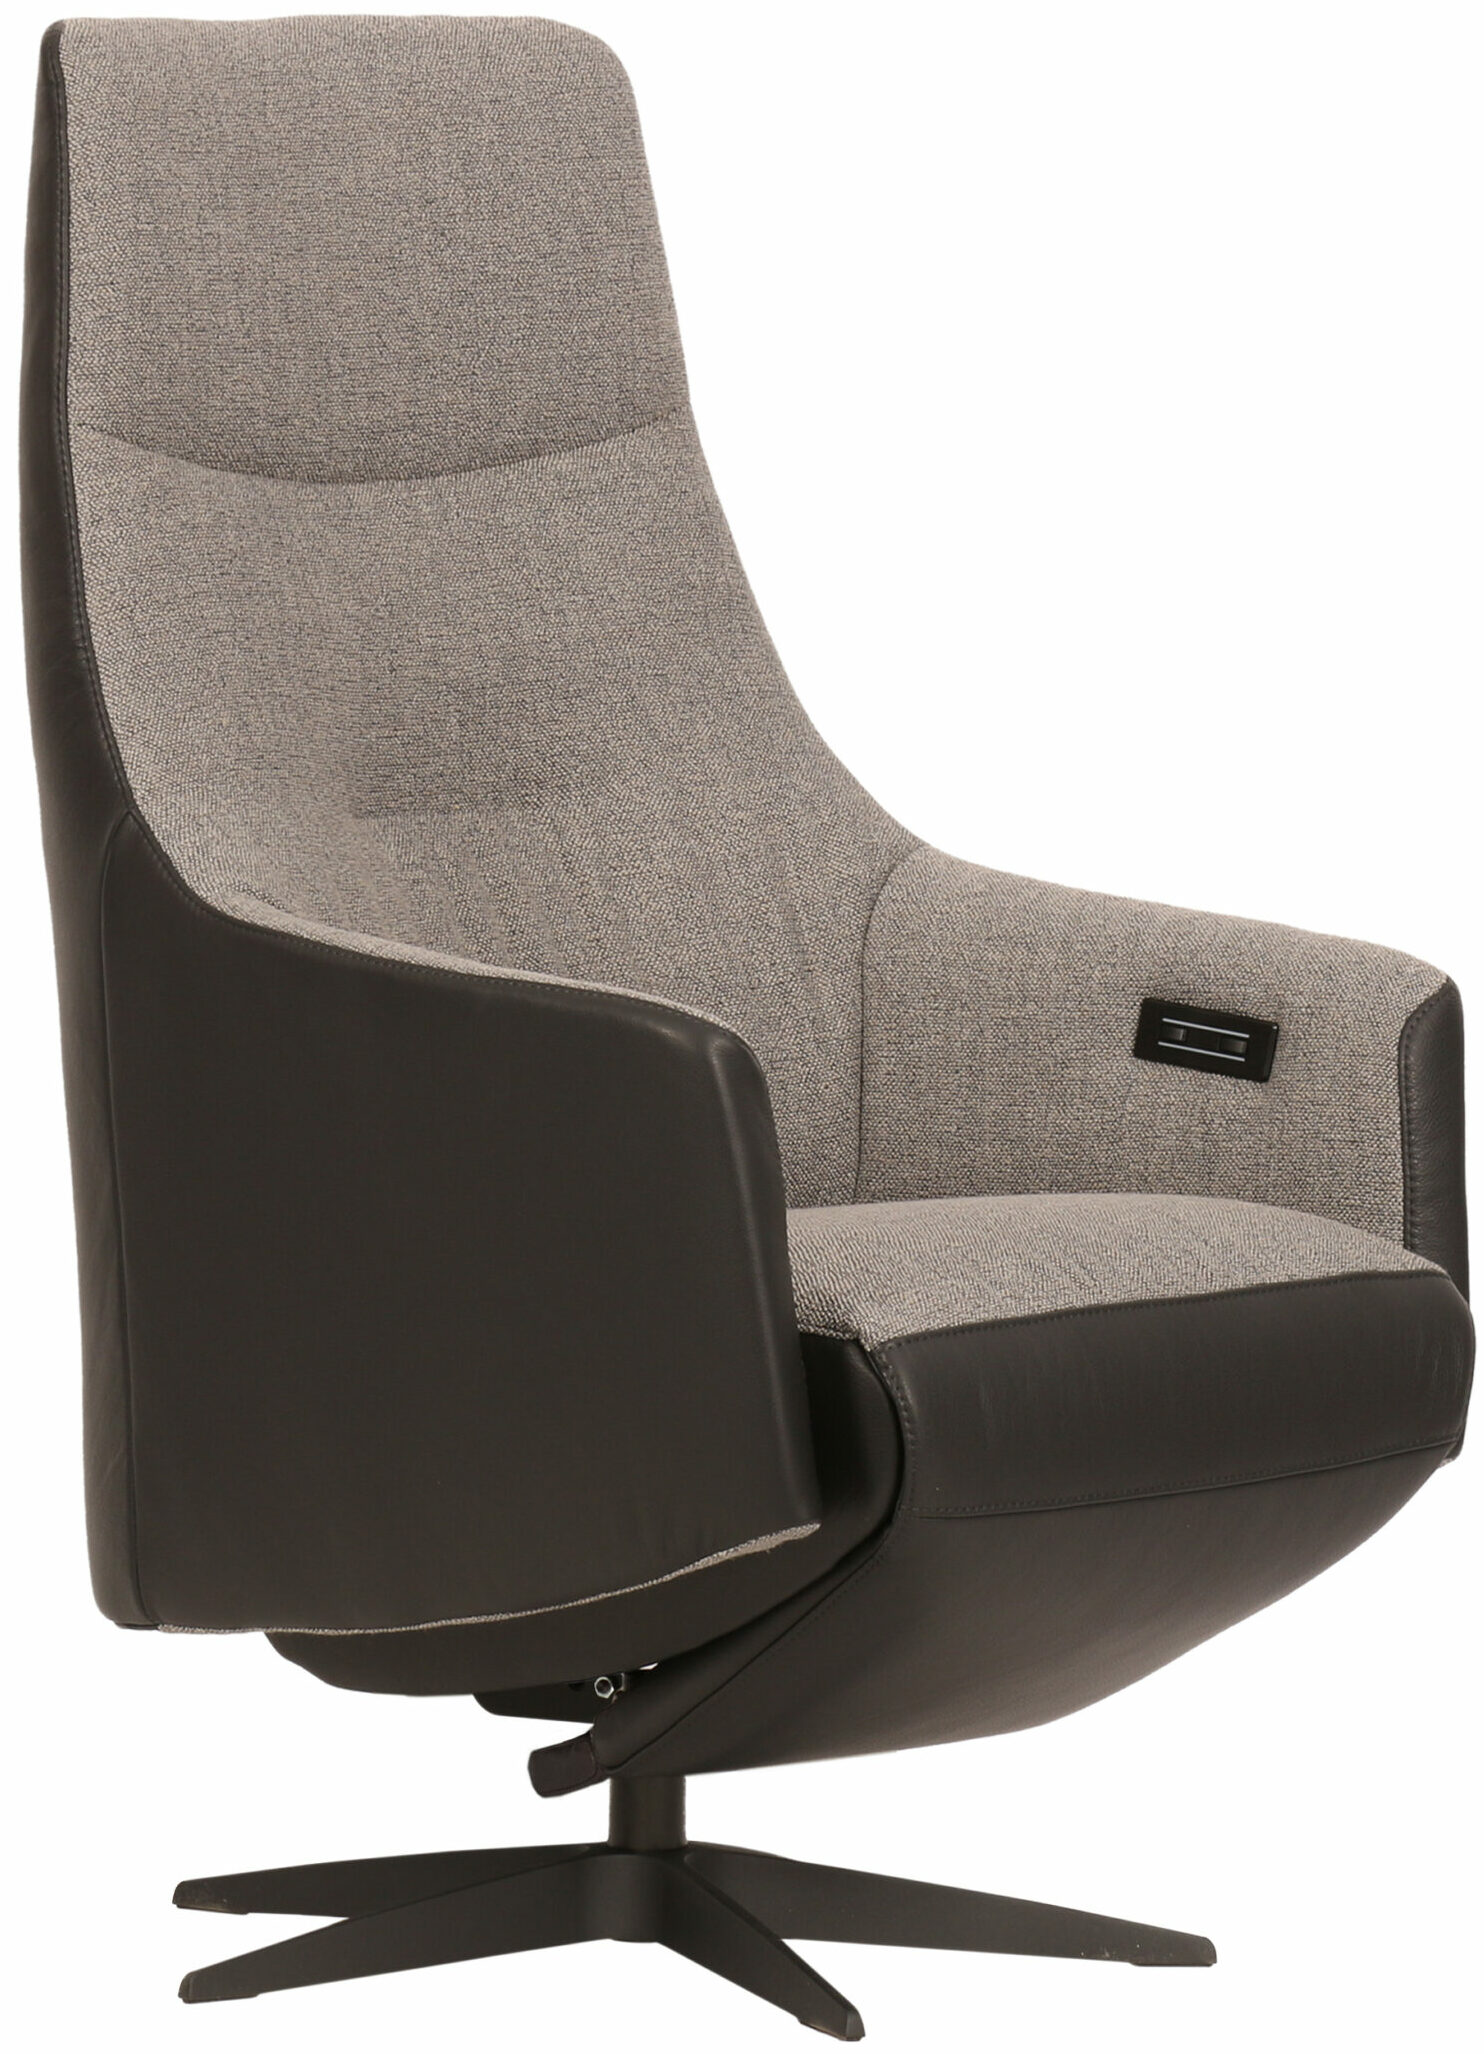 Twinz 106 relaxfauteuil